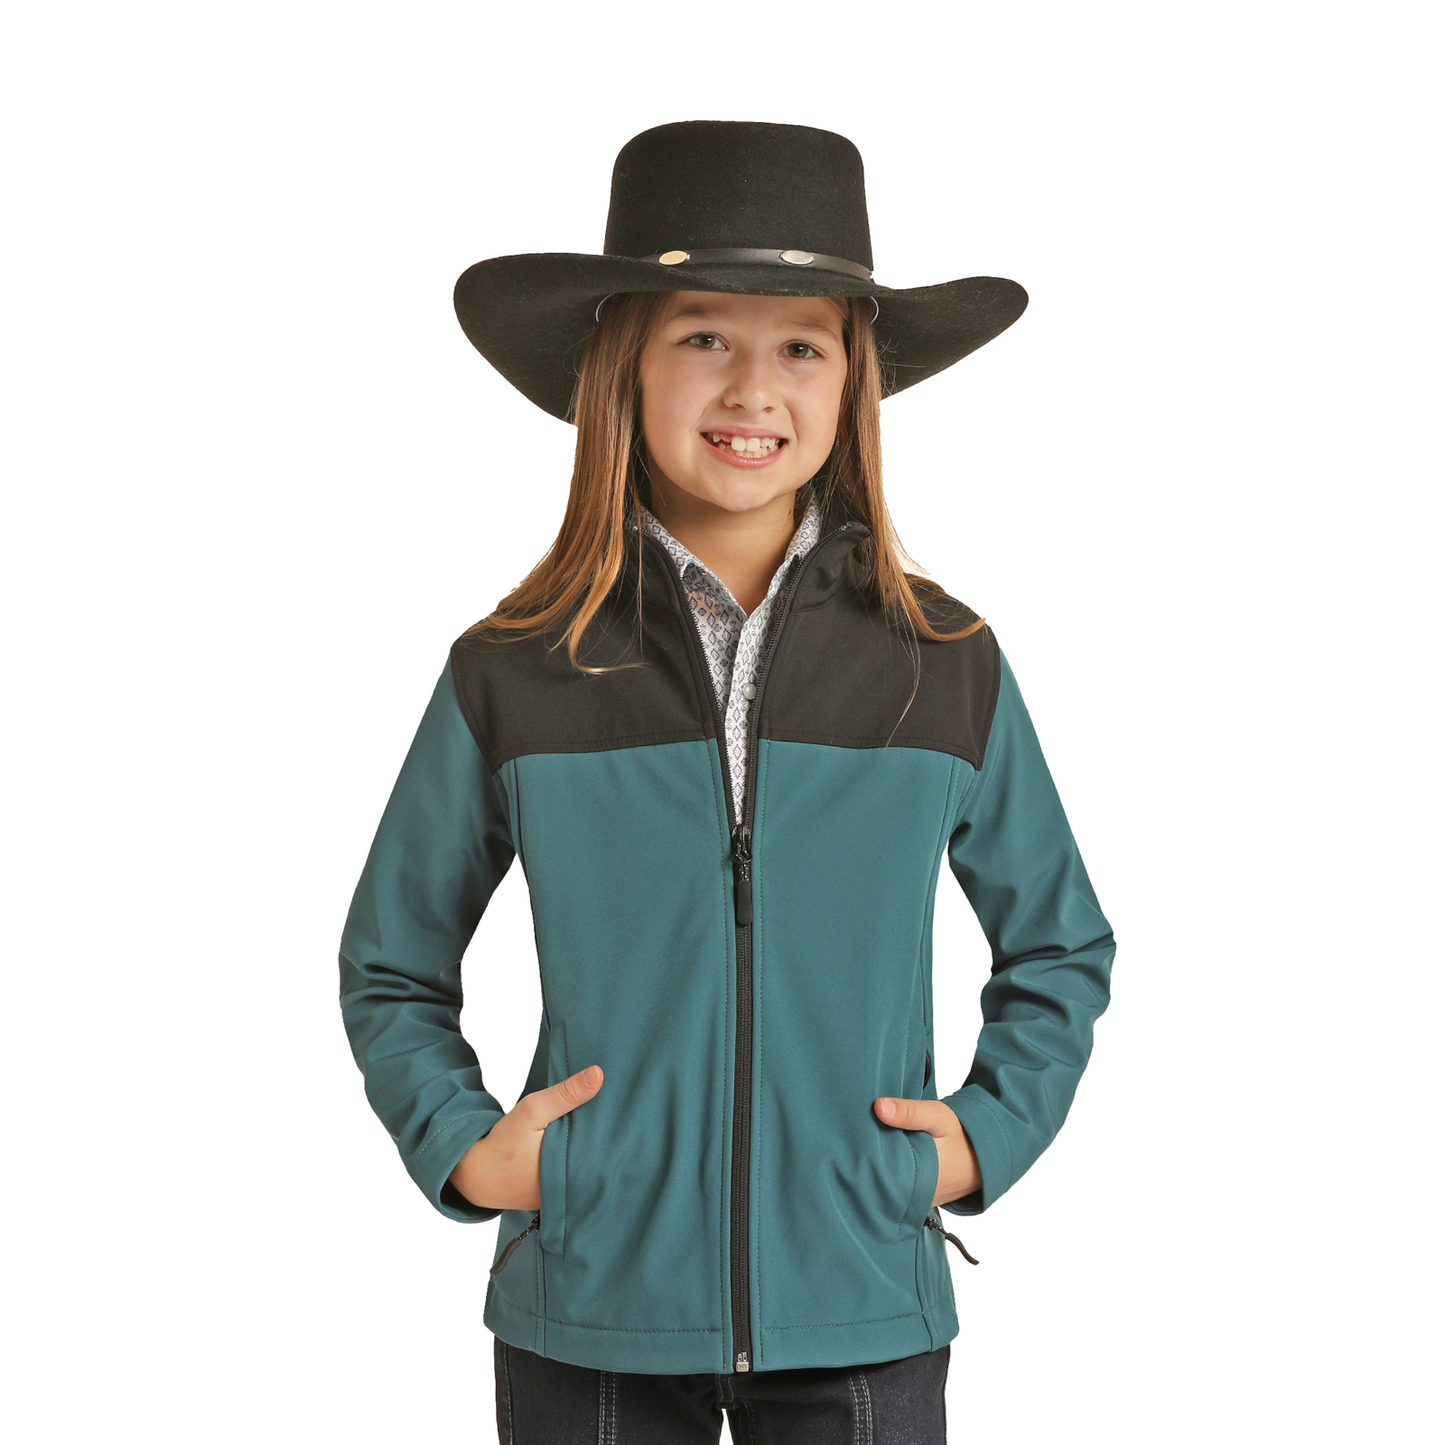 Panhandle® Children's Performance Softshell Teal Jacket PRKO92RZY8-81